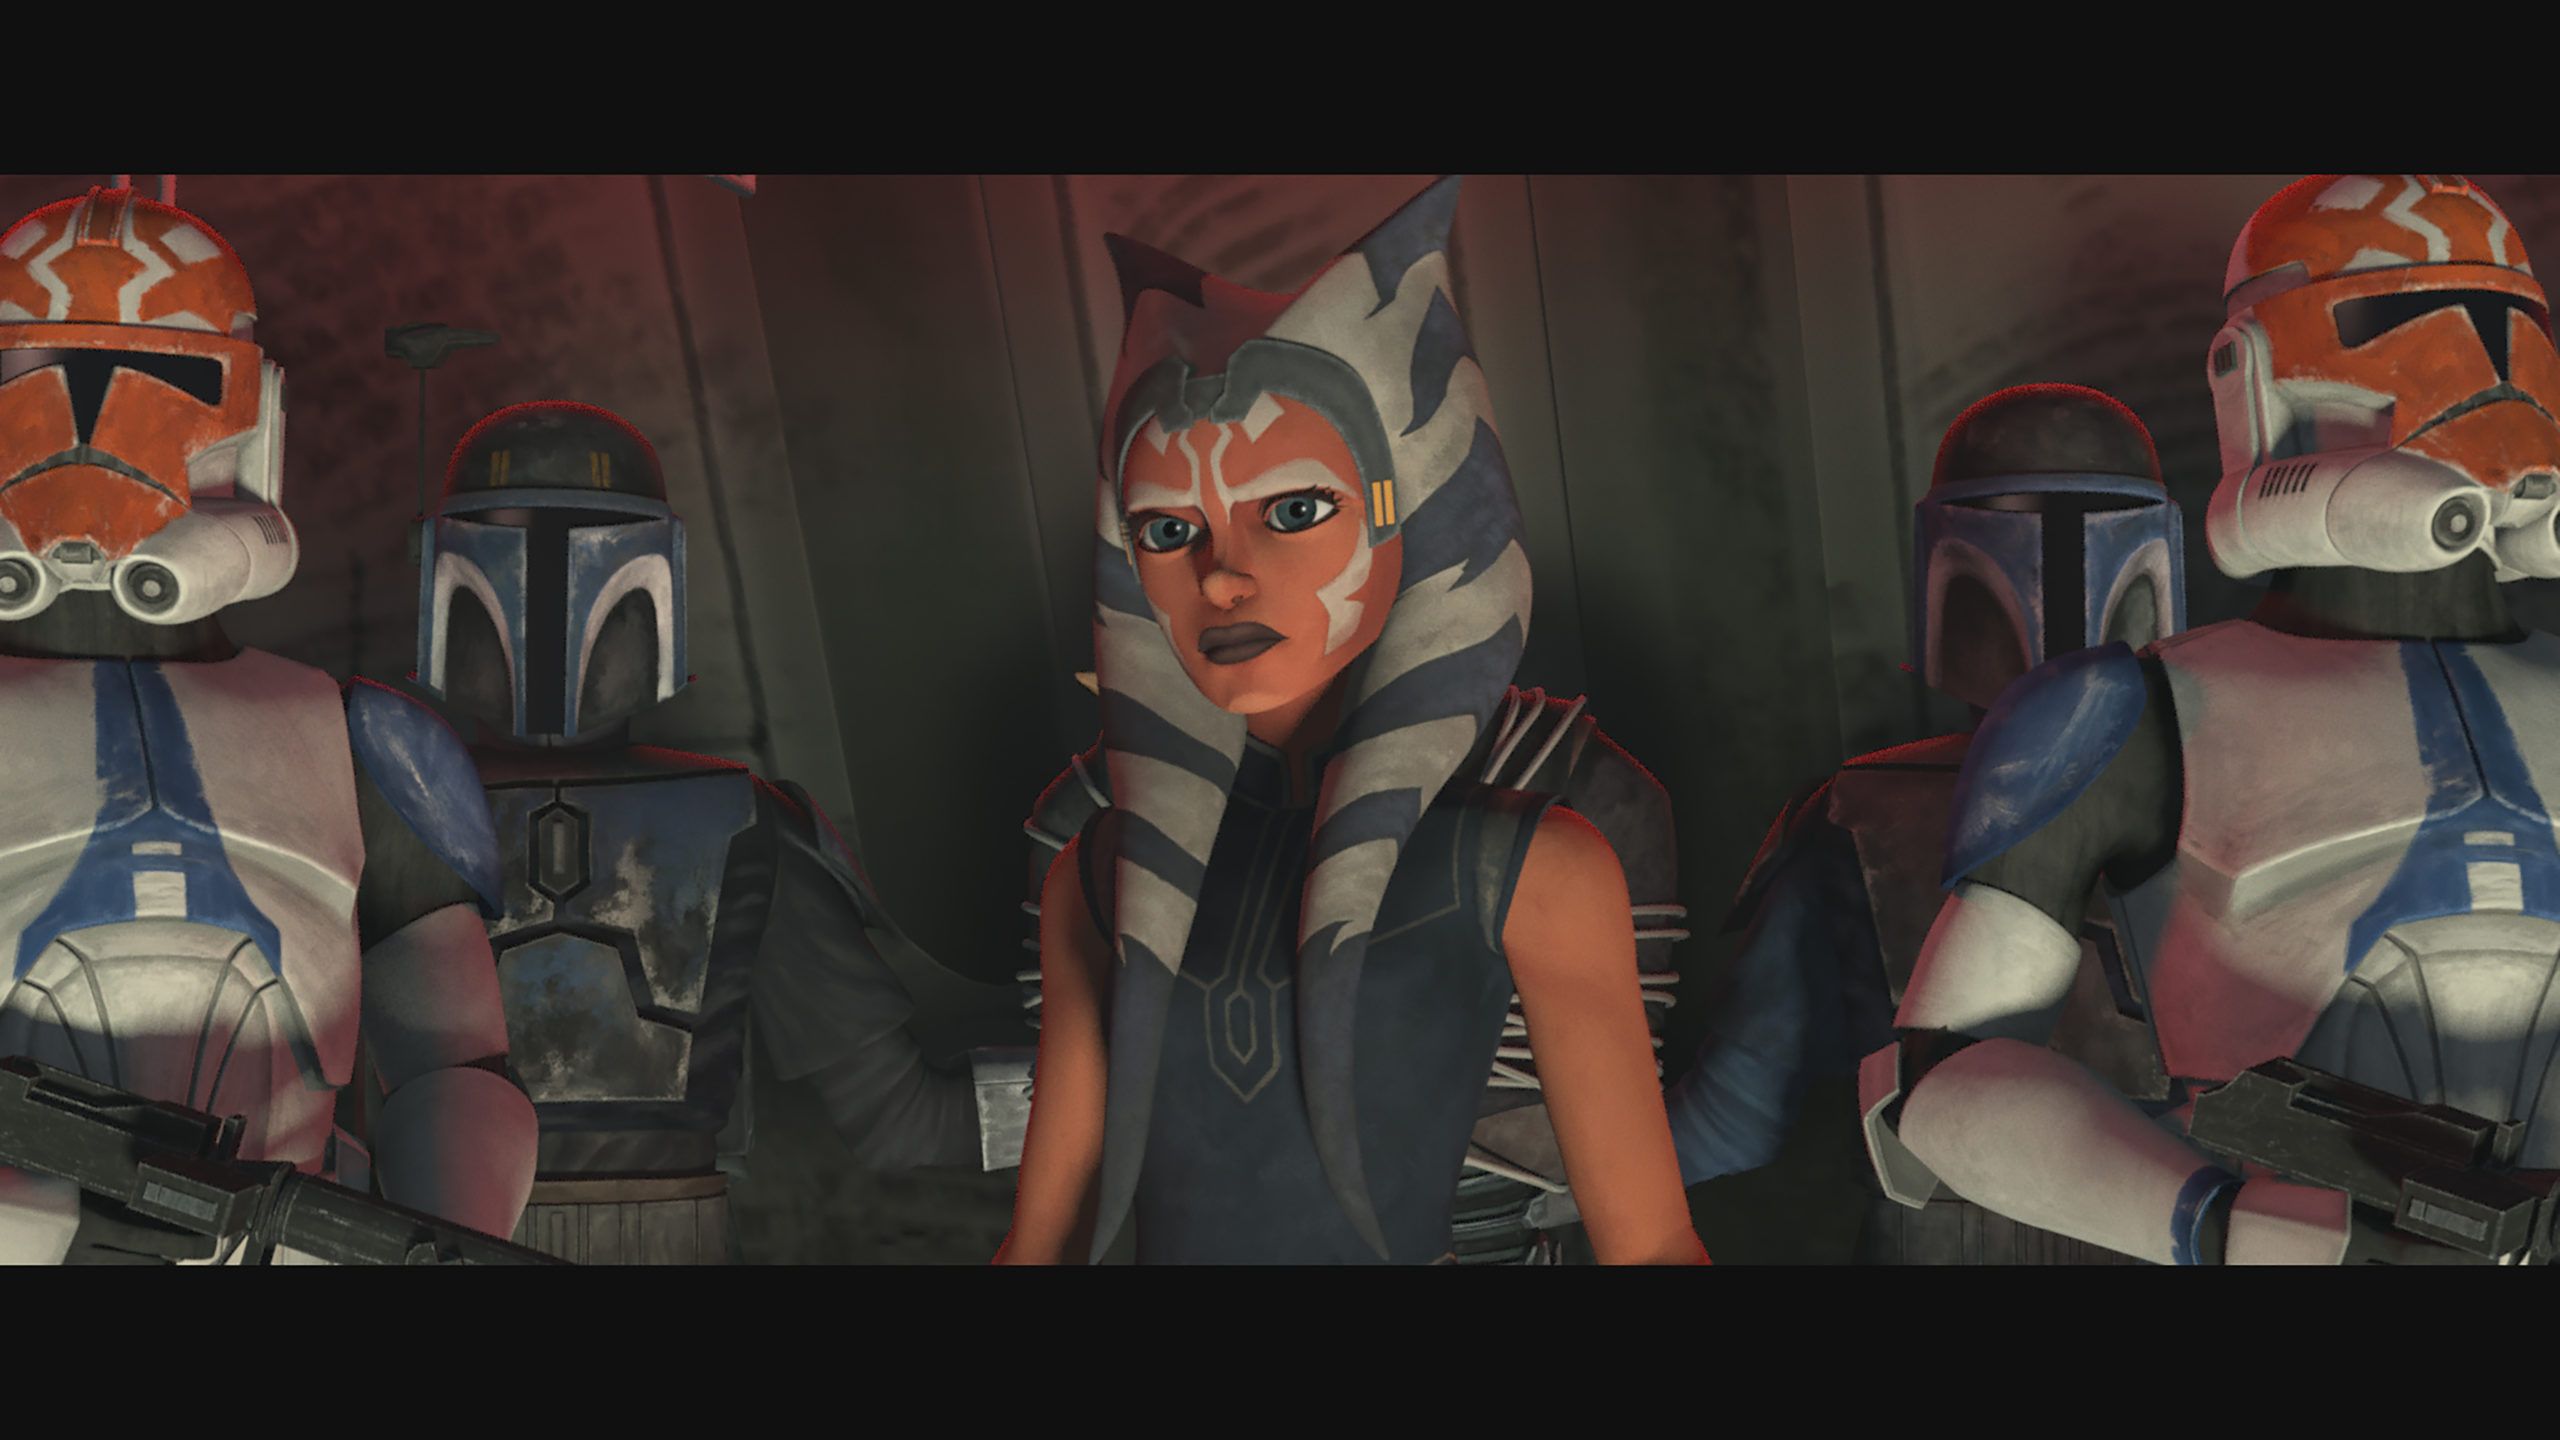 New Clip and Image for Star Wars: The Clone Wars Episode Shattered, Plus Maul vs. Ahsoka Featurette With Kenobi